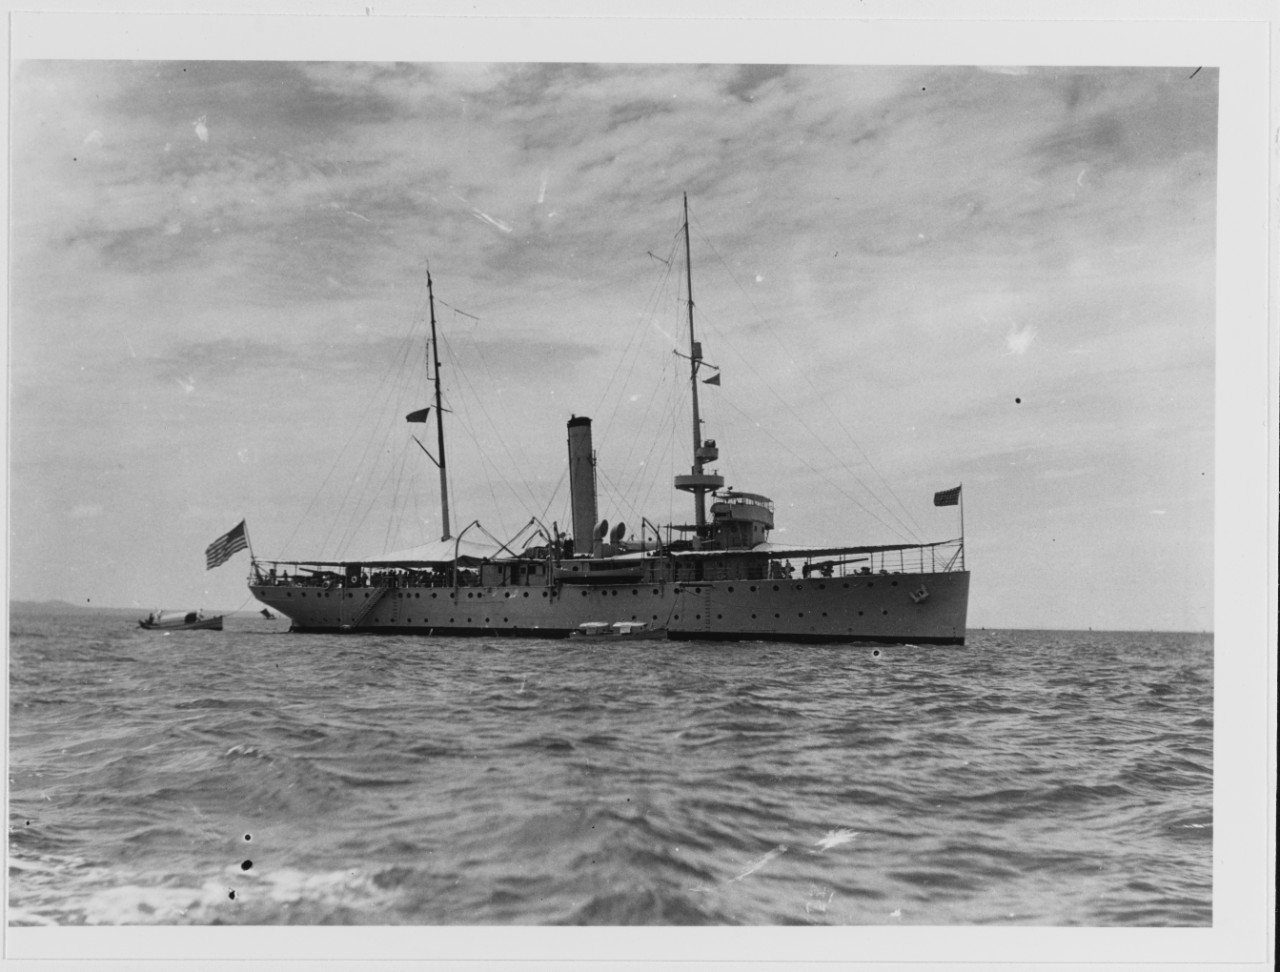 USS SACRAMENTO (PG-19) in Chinese waters, during the 1920s or 1930s